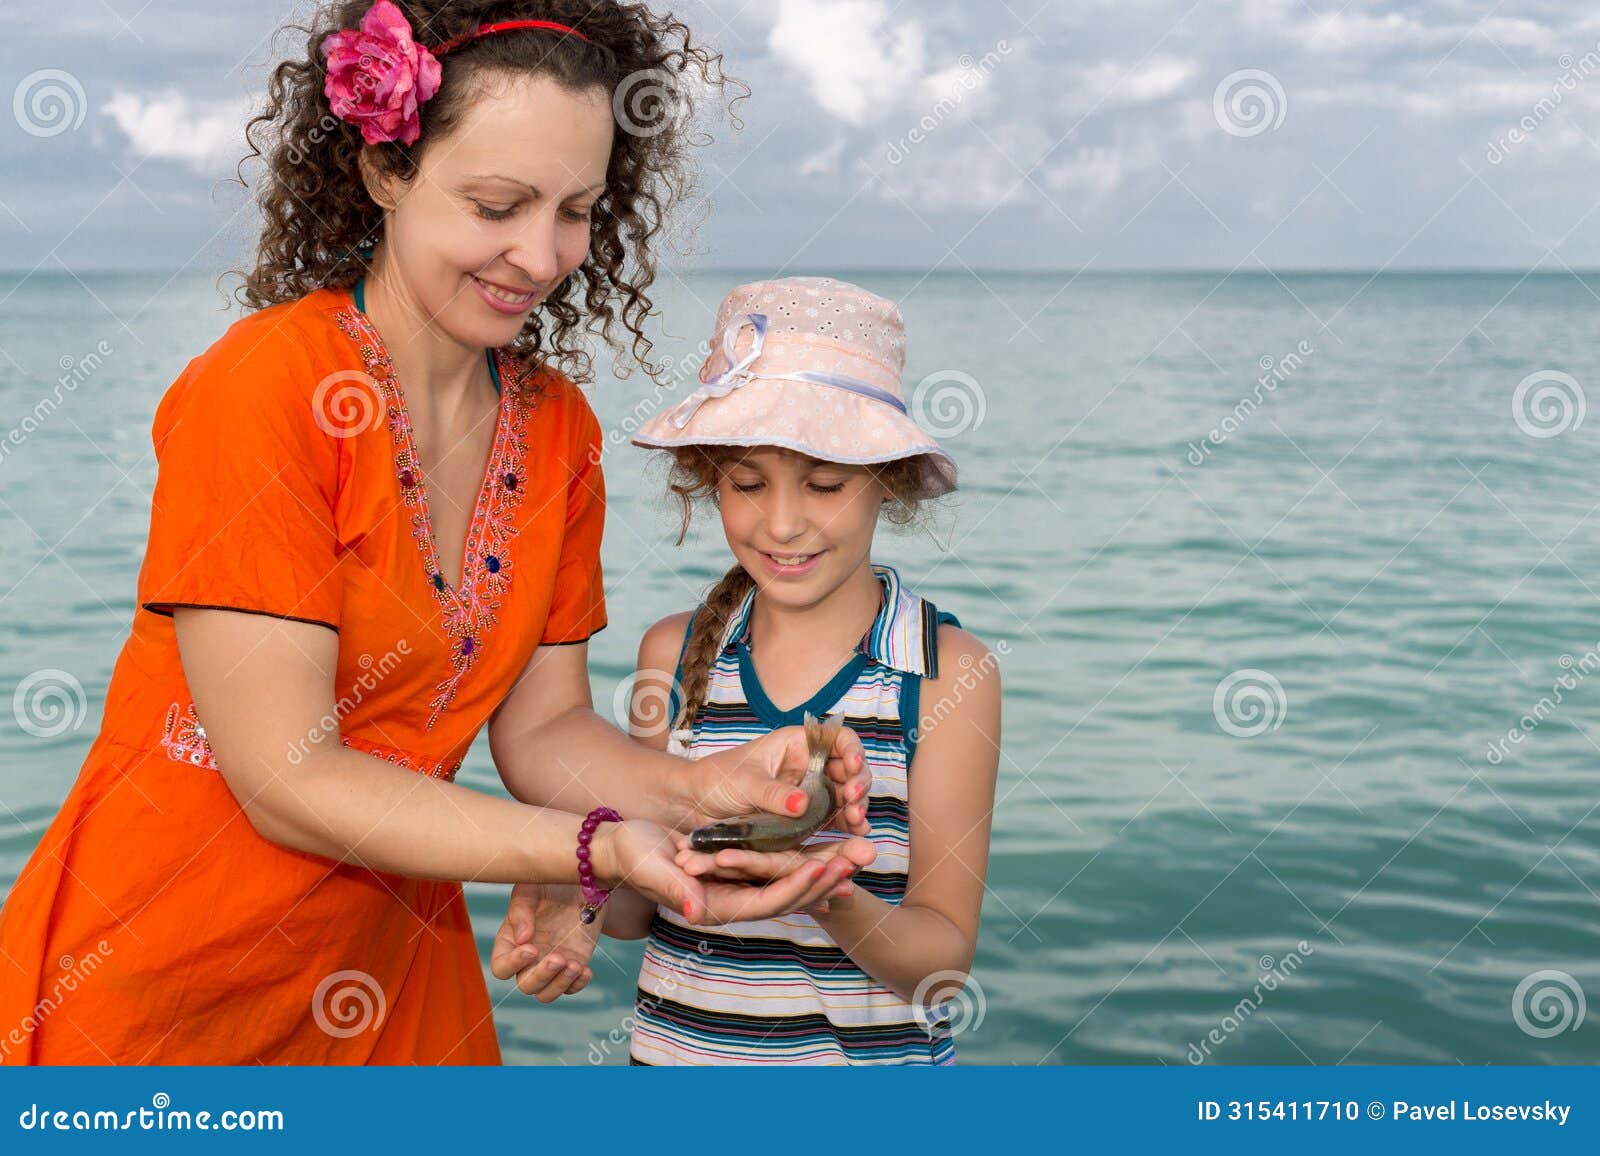 girl with her mother holding freshly caught